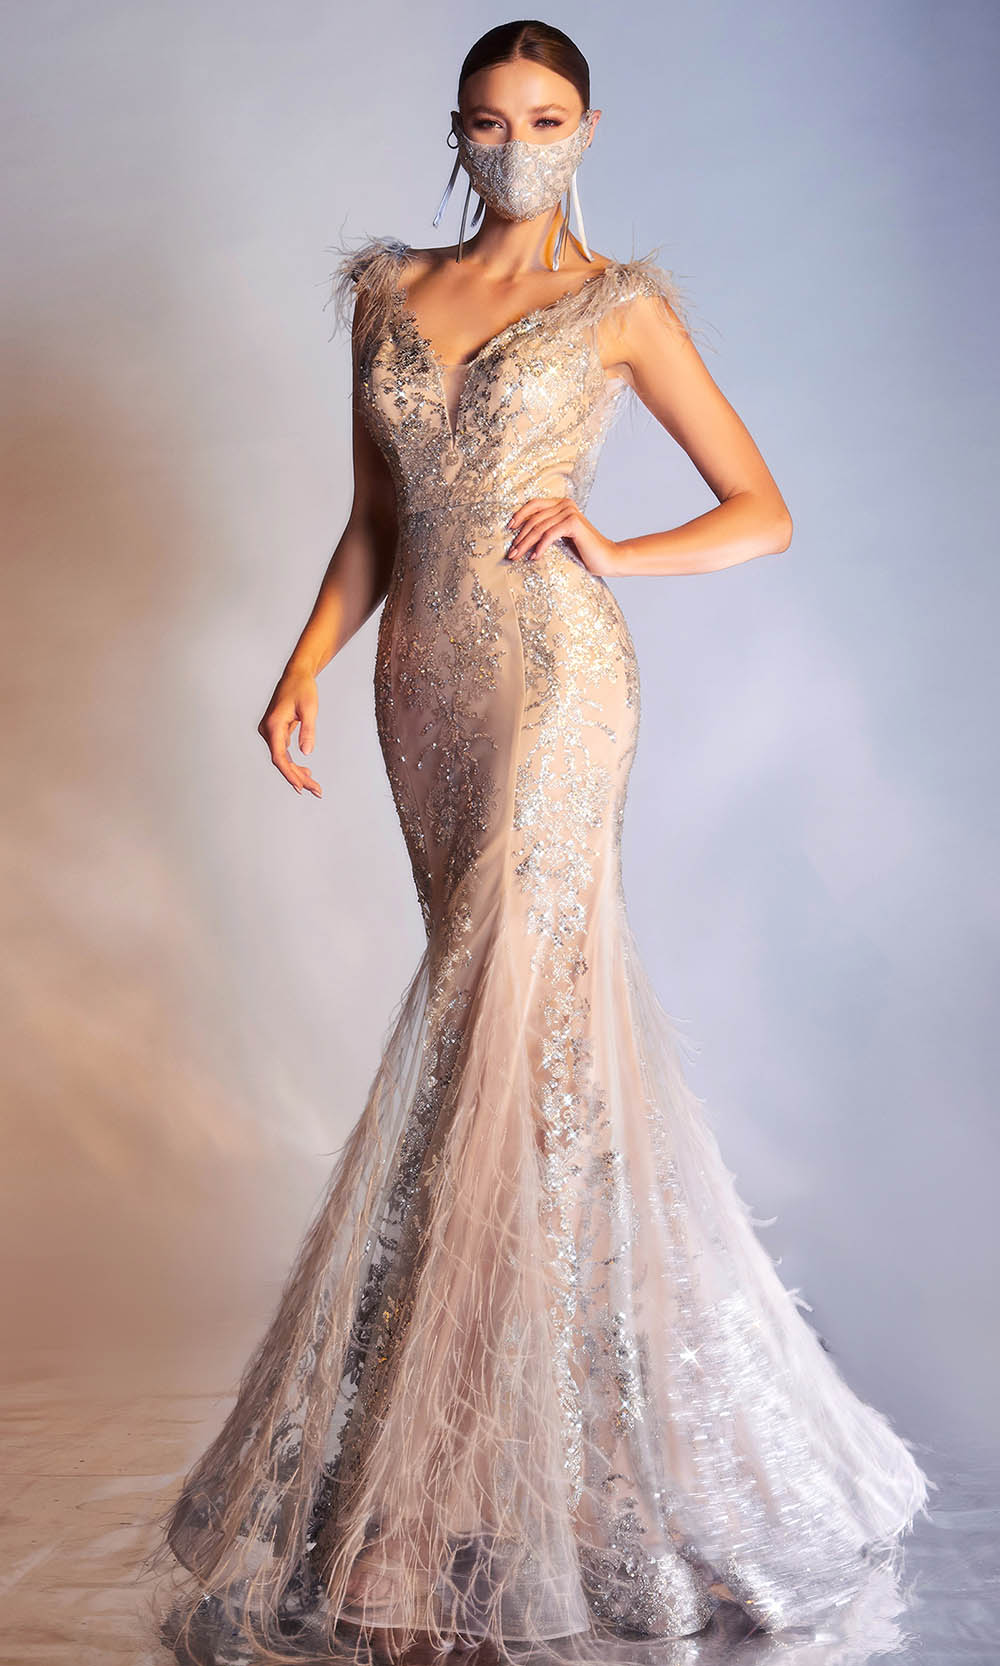 Cinderella Divine - C57 Embellished Deep V Neck Mermaid Gown In Silver and Gray